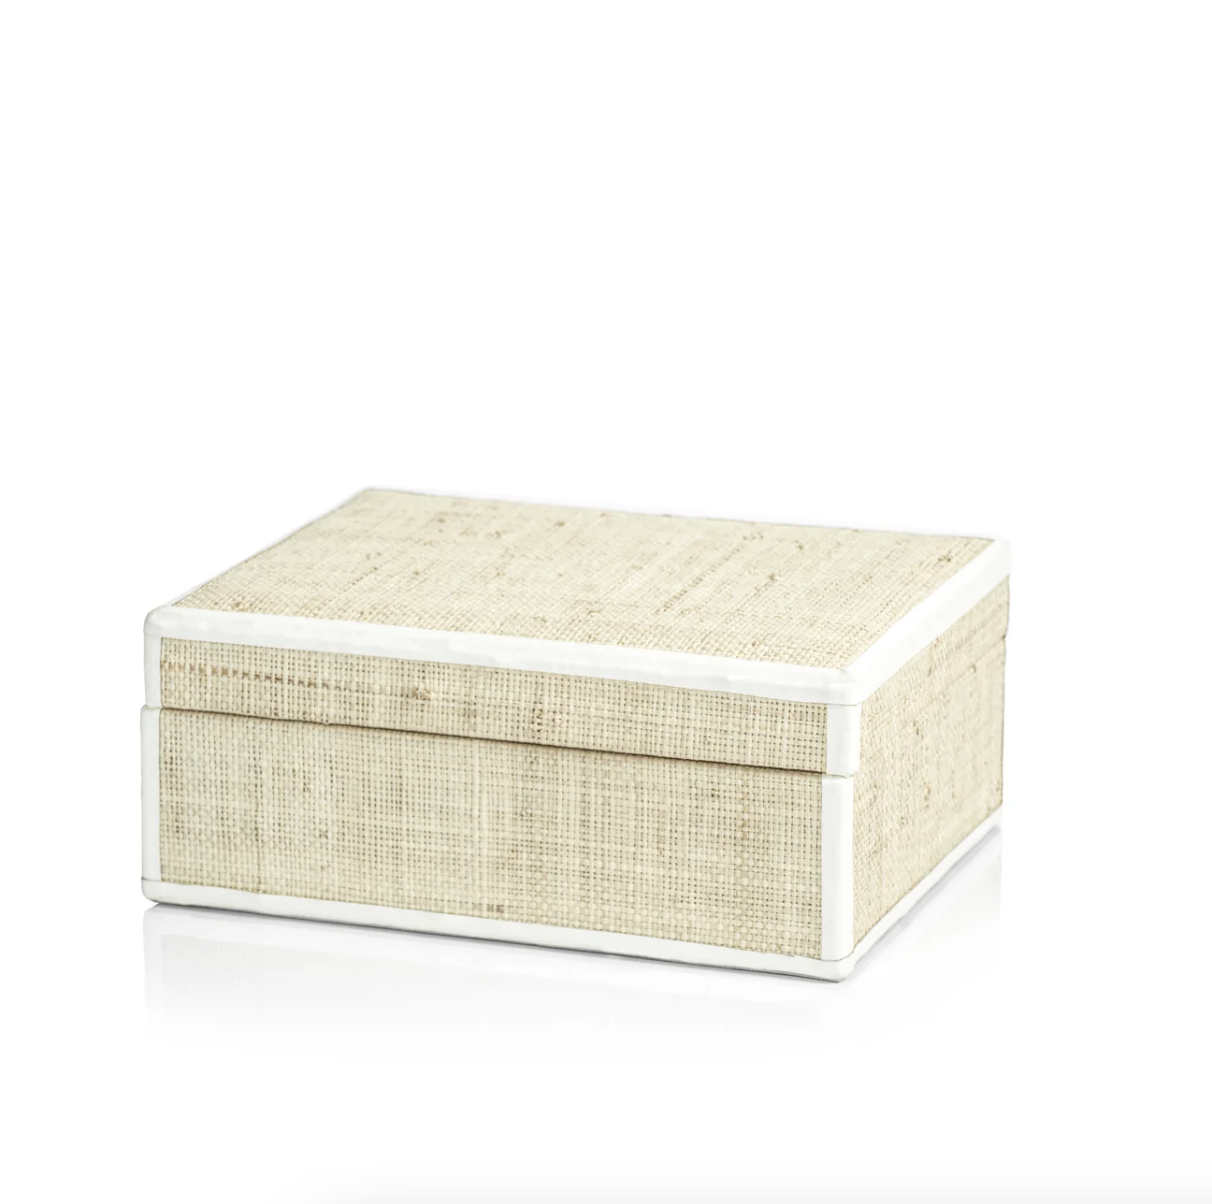 A rectangular beige textured Zodax Raffia Box with Leather Trim, isolated on a white background.